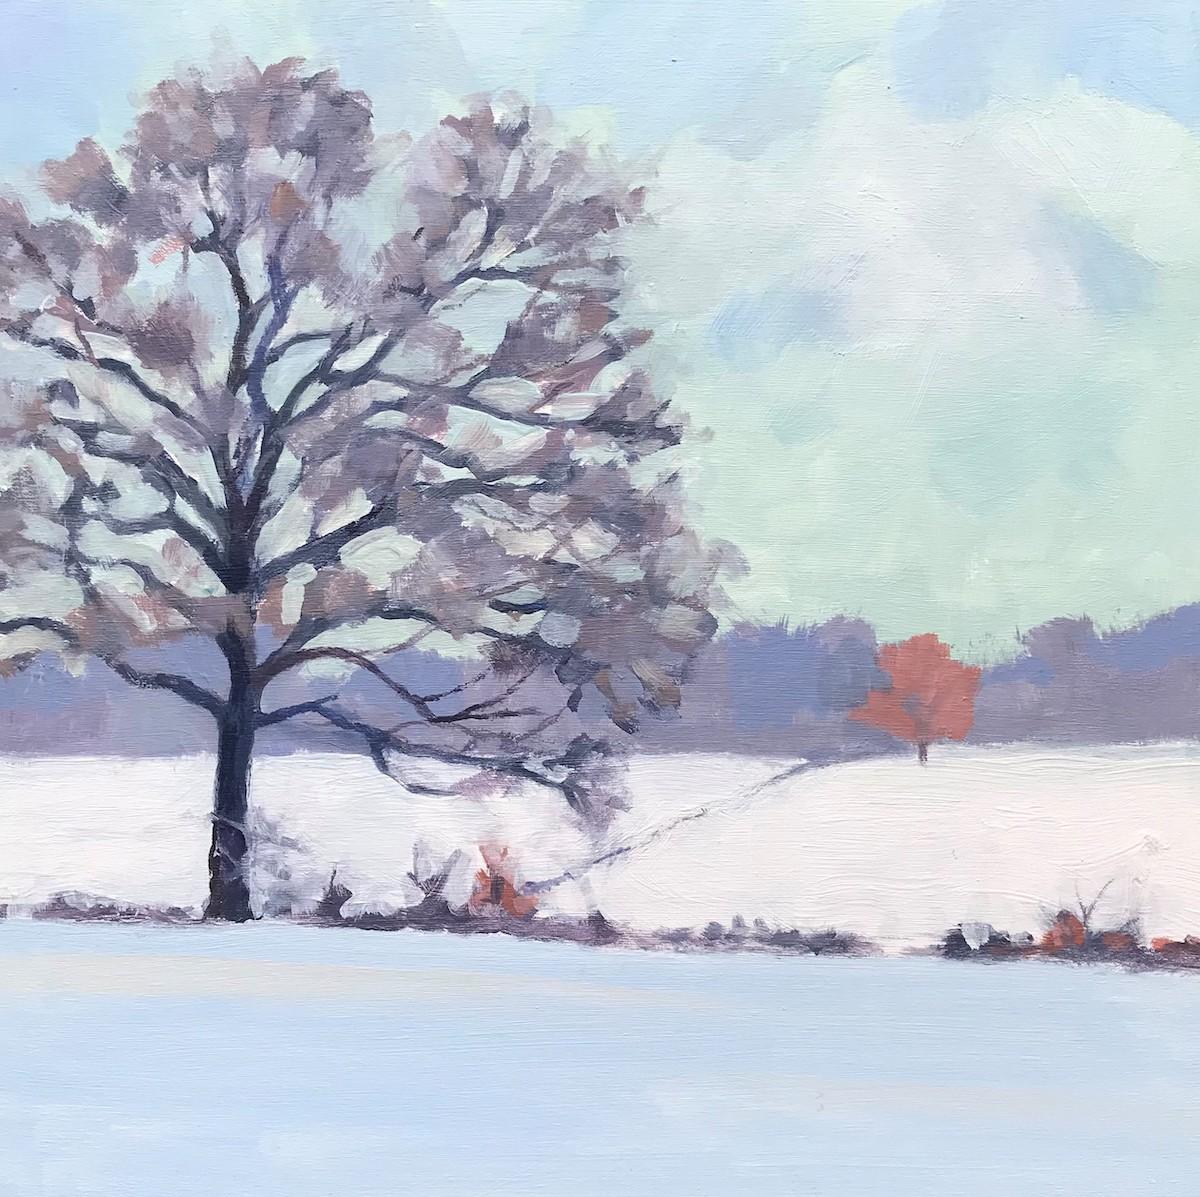 Snow in the Fields by Margaret Crutchley, Original painting, Snow art [2021]